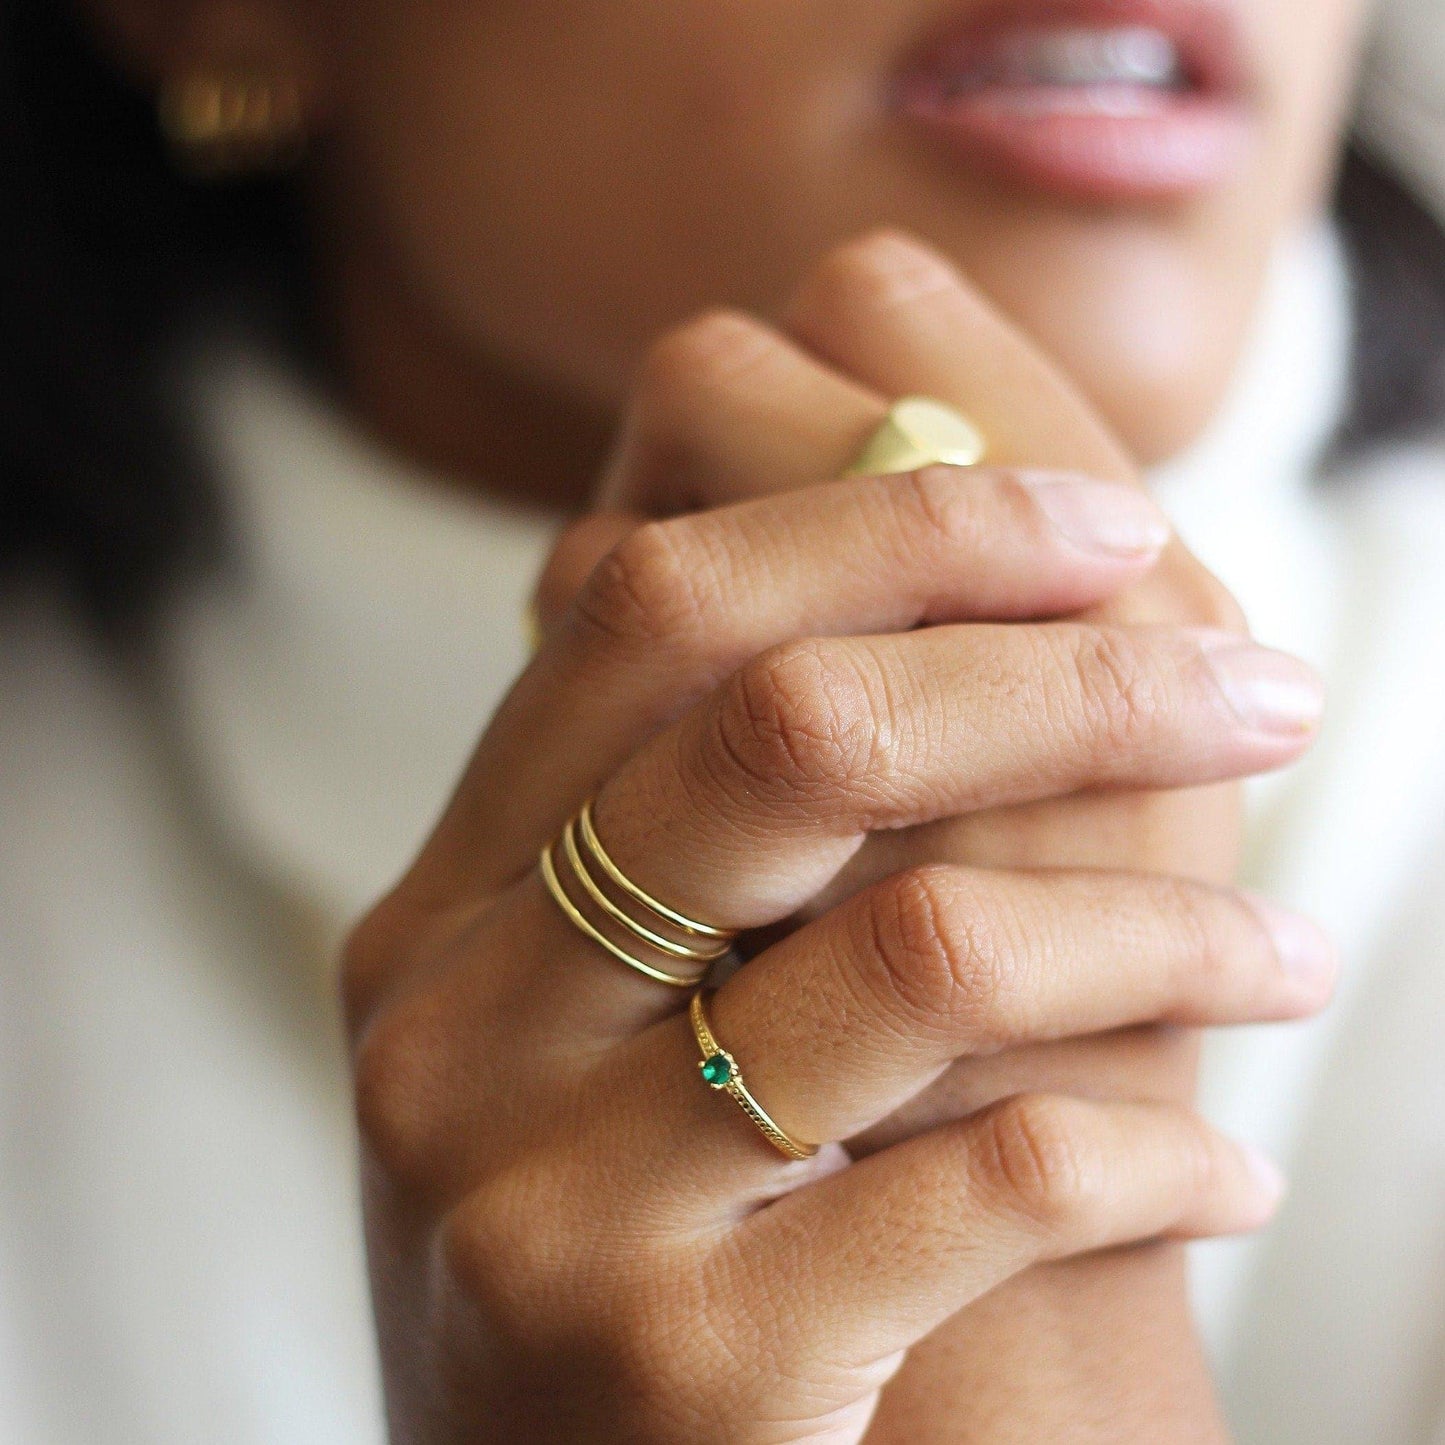 THE EMMA RING GREEN - Solid 14k gold